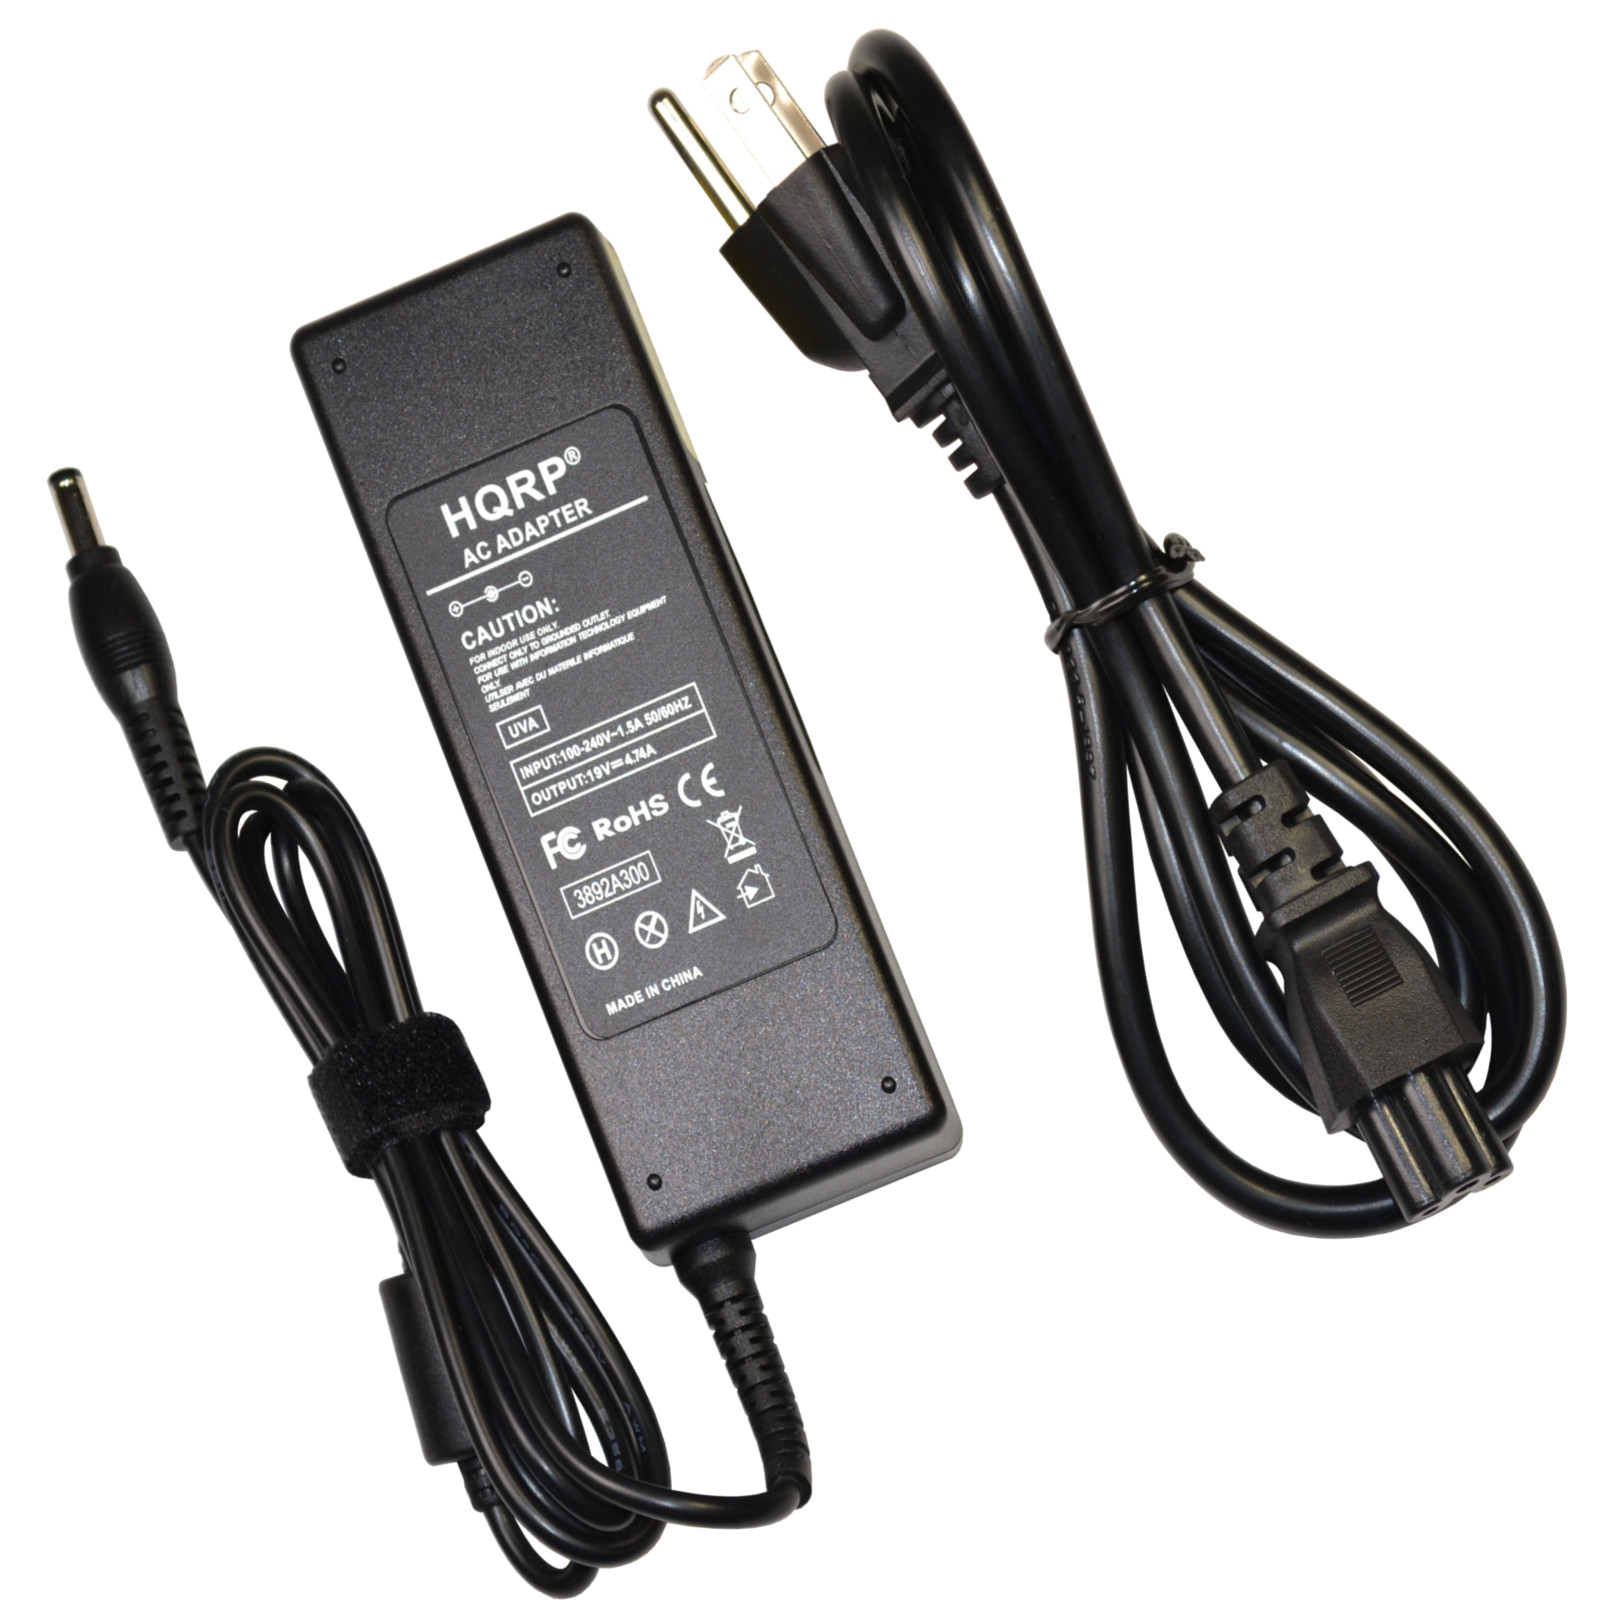 HQRP AC Adapter for Westinghouse LD-2655VX LD-2657DF LD-2680 LD-2685VX LED LCD HDTV TV Power Supply Cord Westing house - image 1 of 7